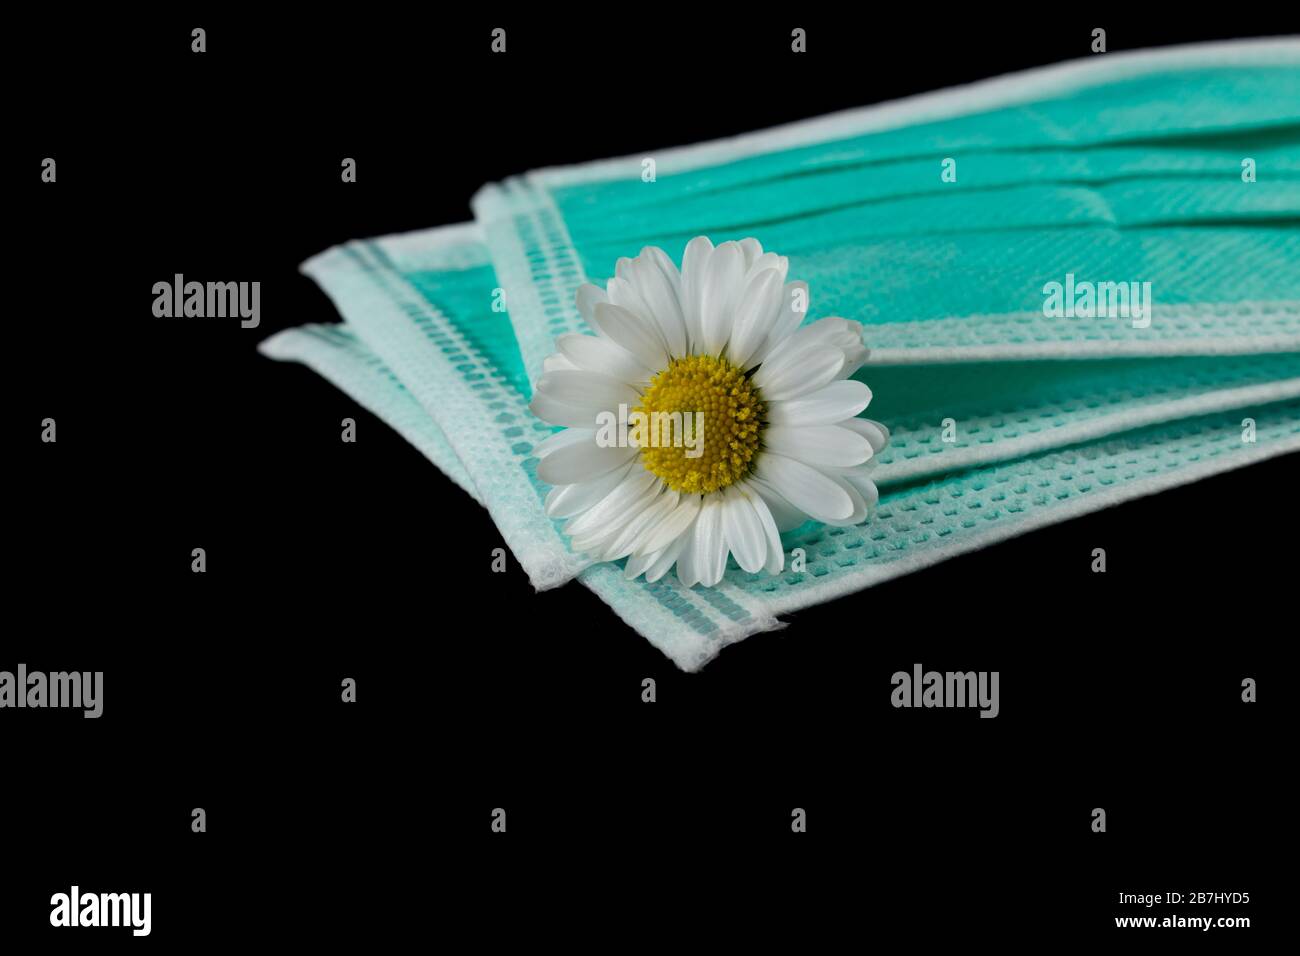 Daisy lies between medical masks, concept of protection, caring and hope Stock Photo